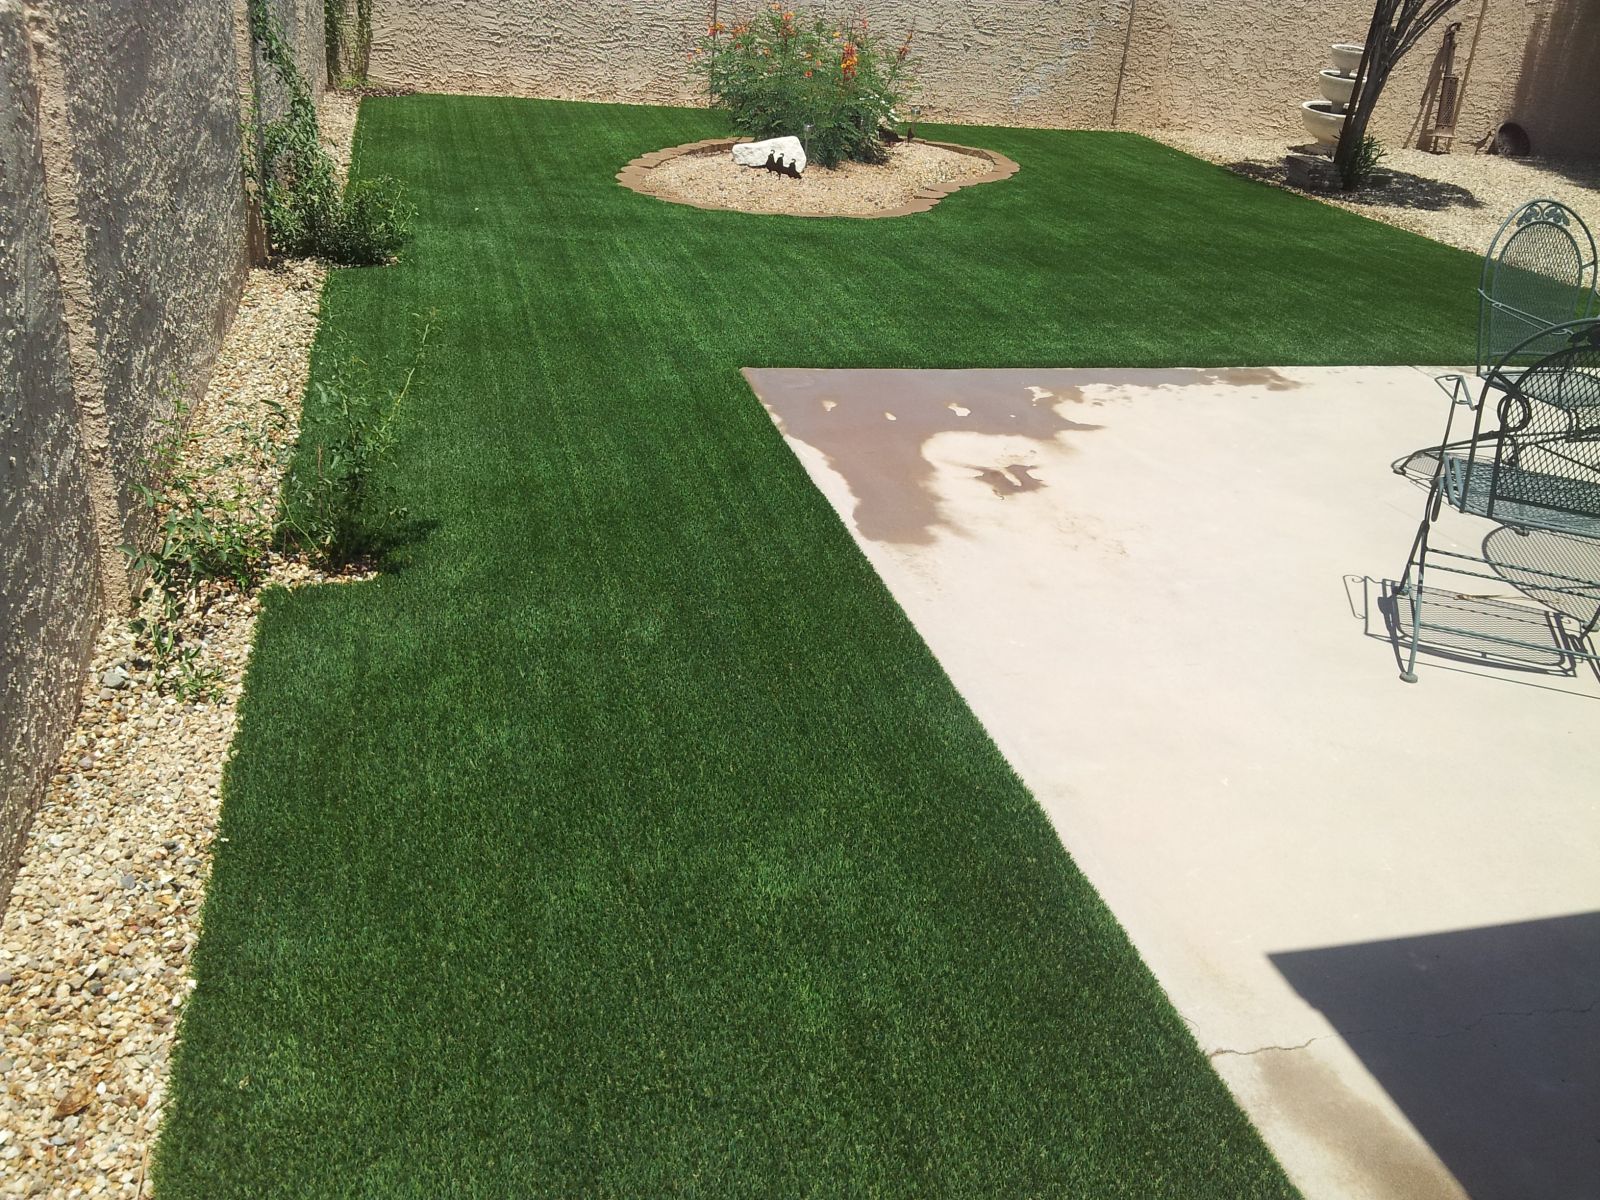 Ready To Transform Your Yard With The Best Artificial Grass In Mesa, AZ